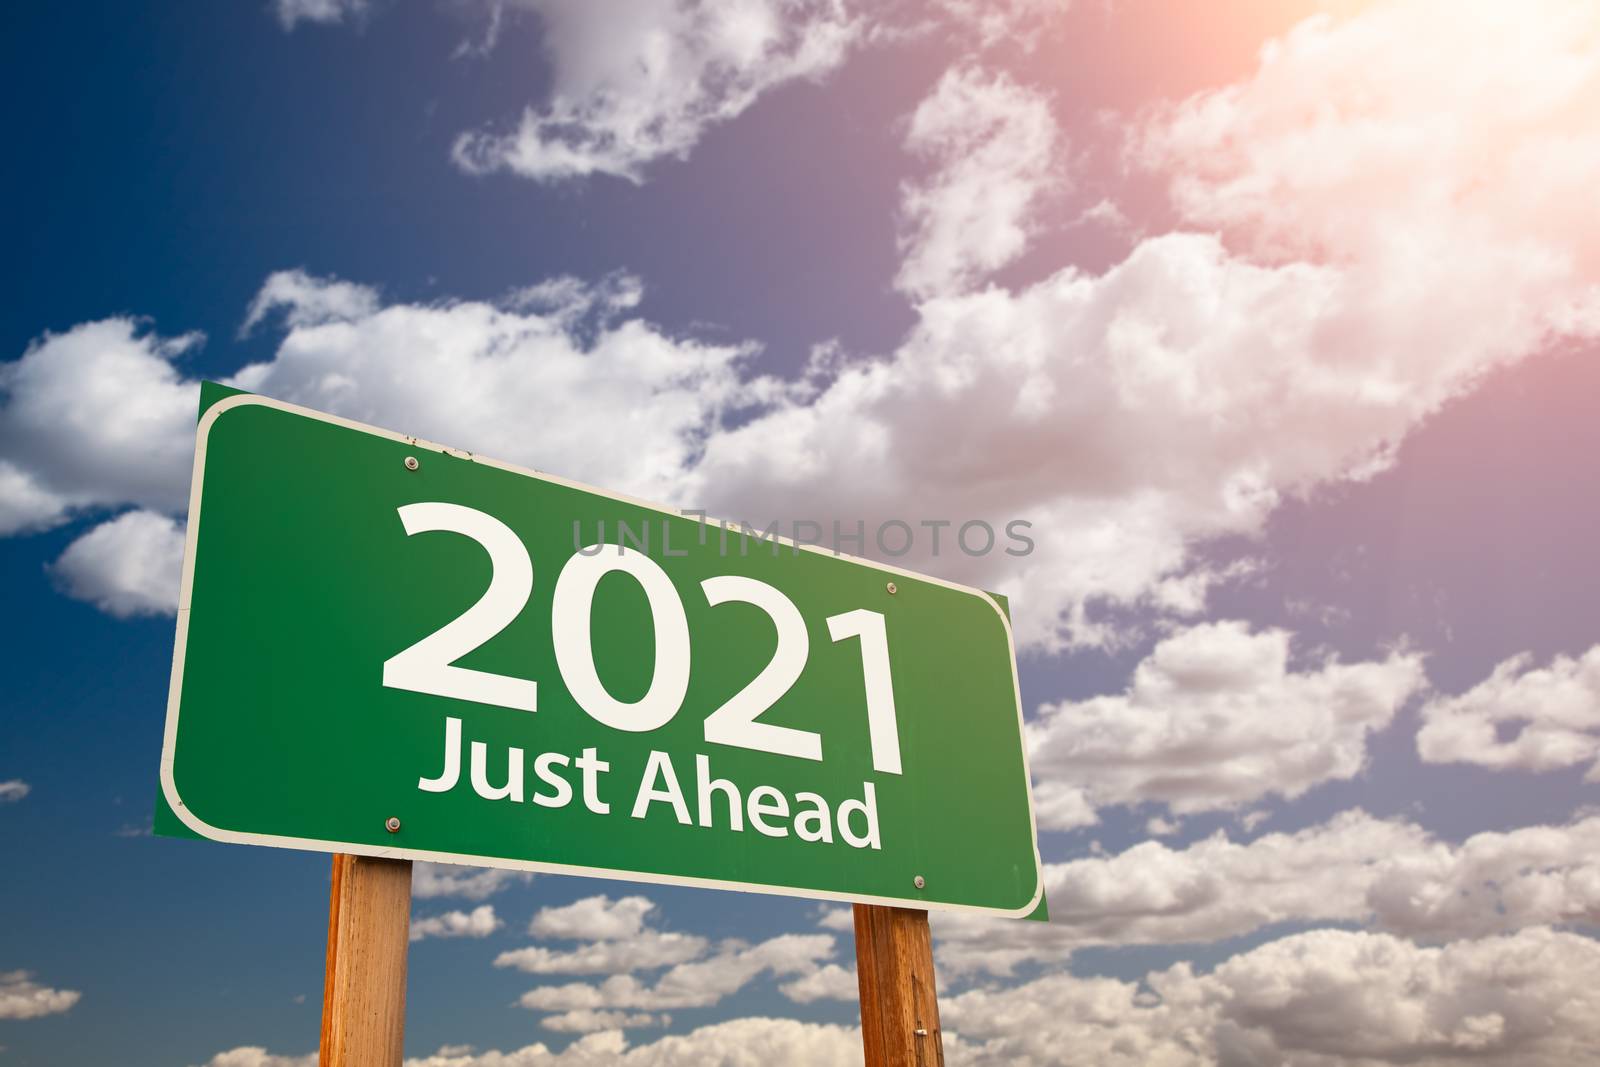 2021 Green Road Sign Over Dramatic Clouds and Sky by Feverpitched